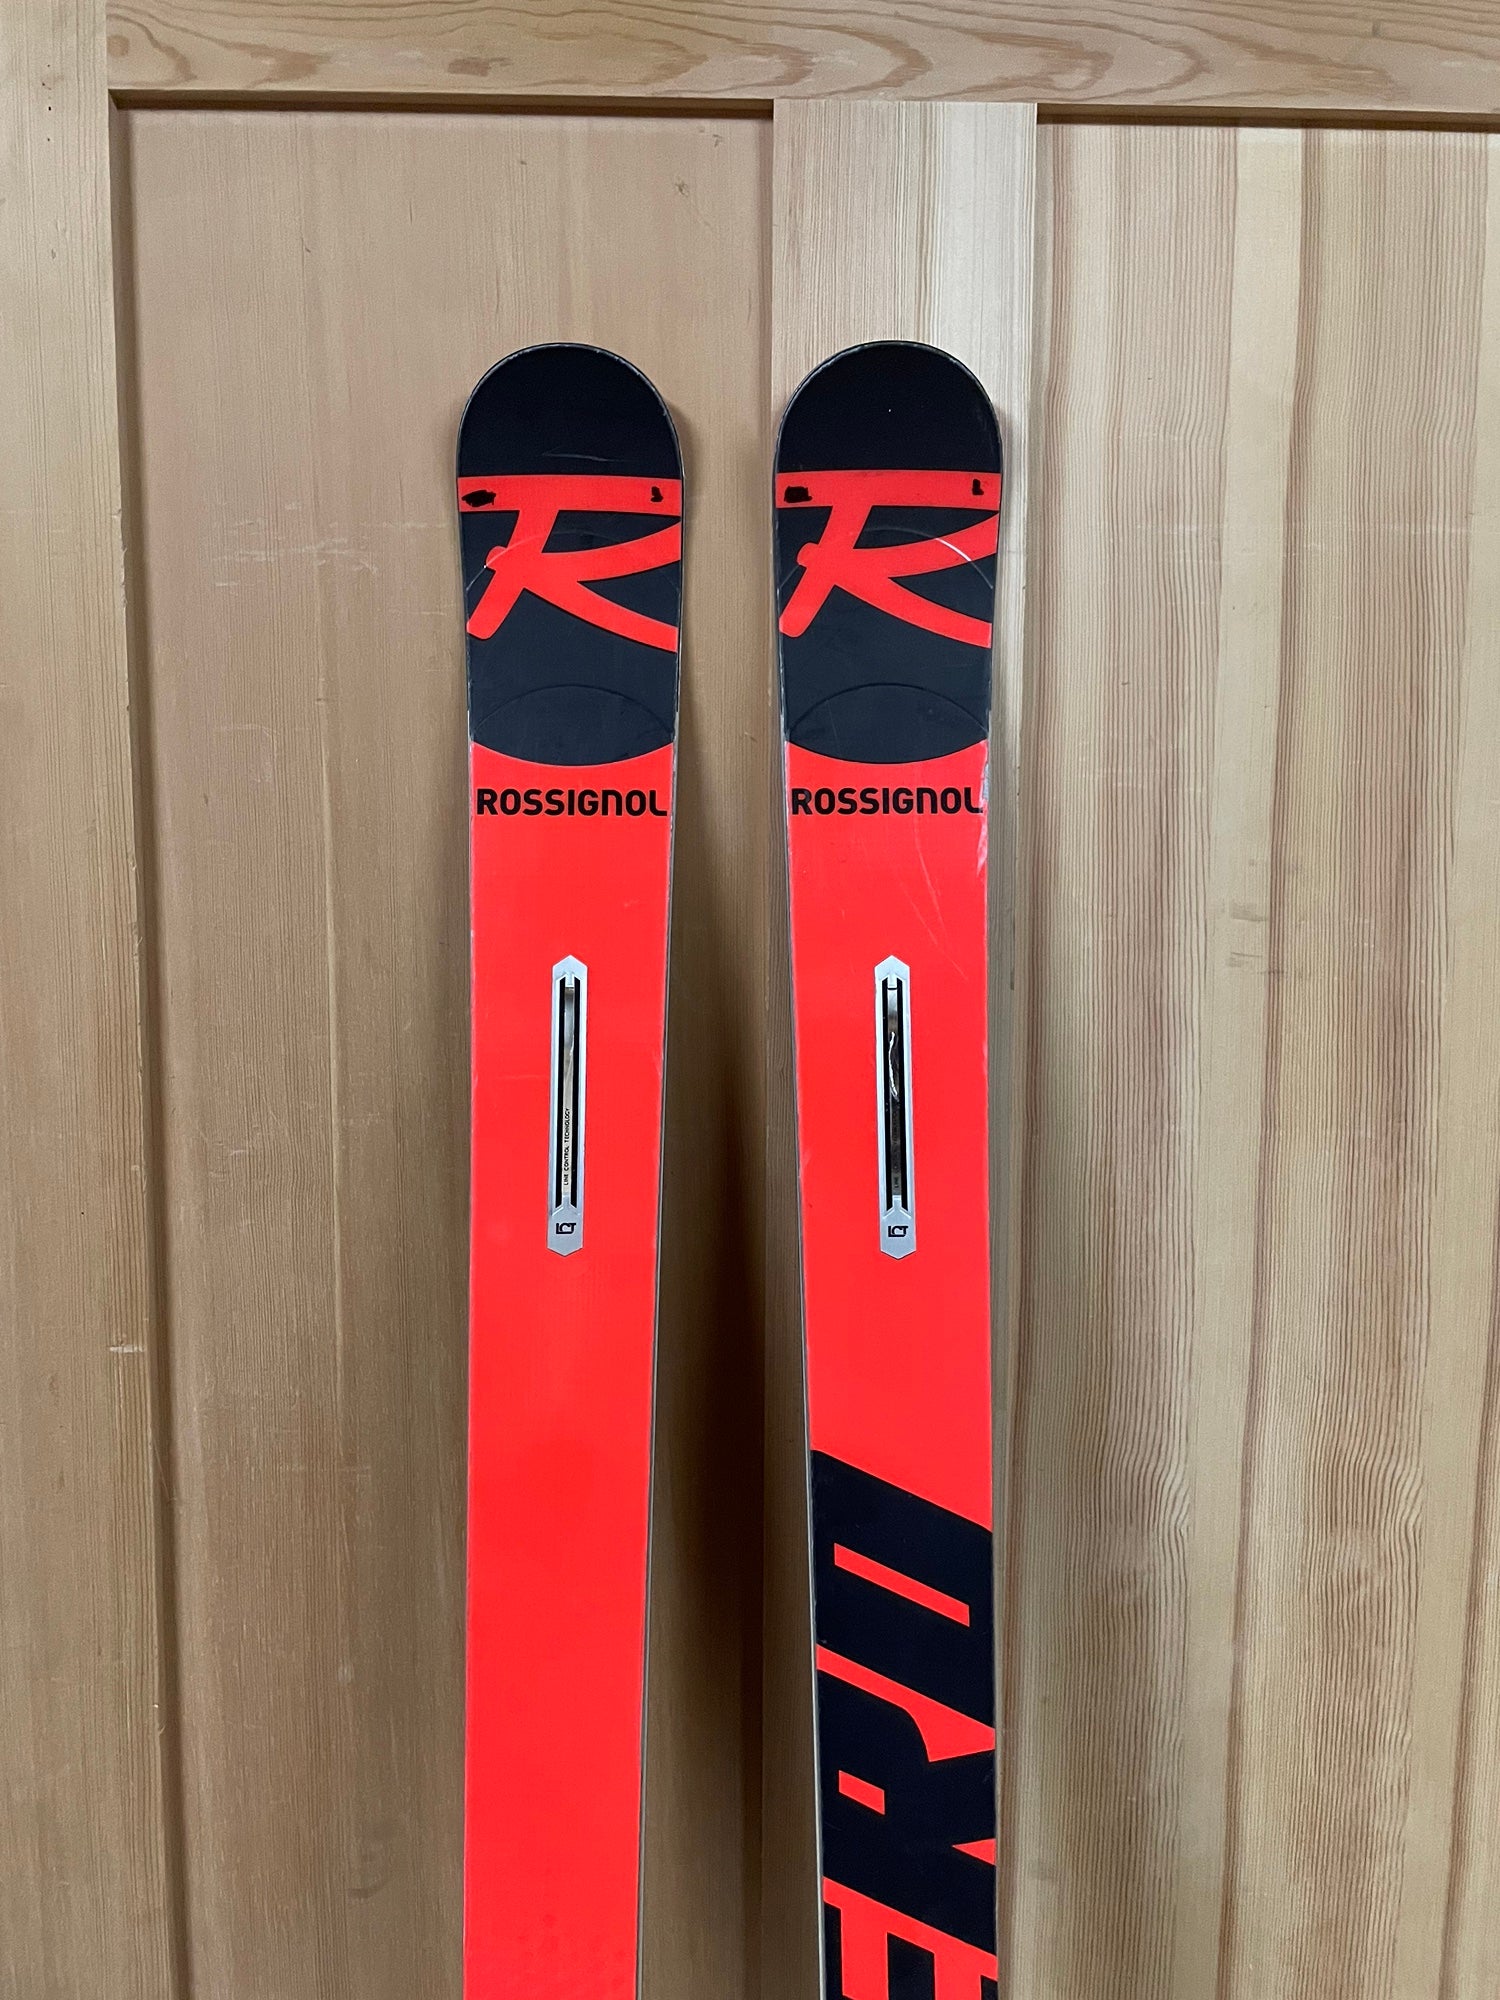 Used Rossignol 188 cm Racing Hero FIS GS Pro Skis Without Bindings